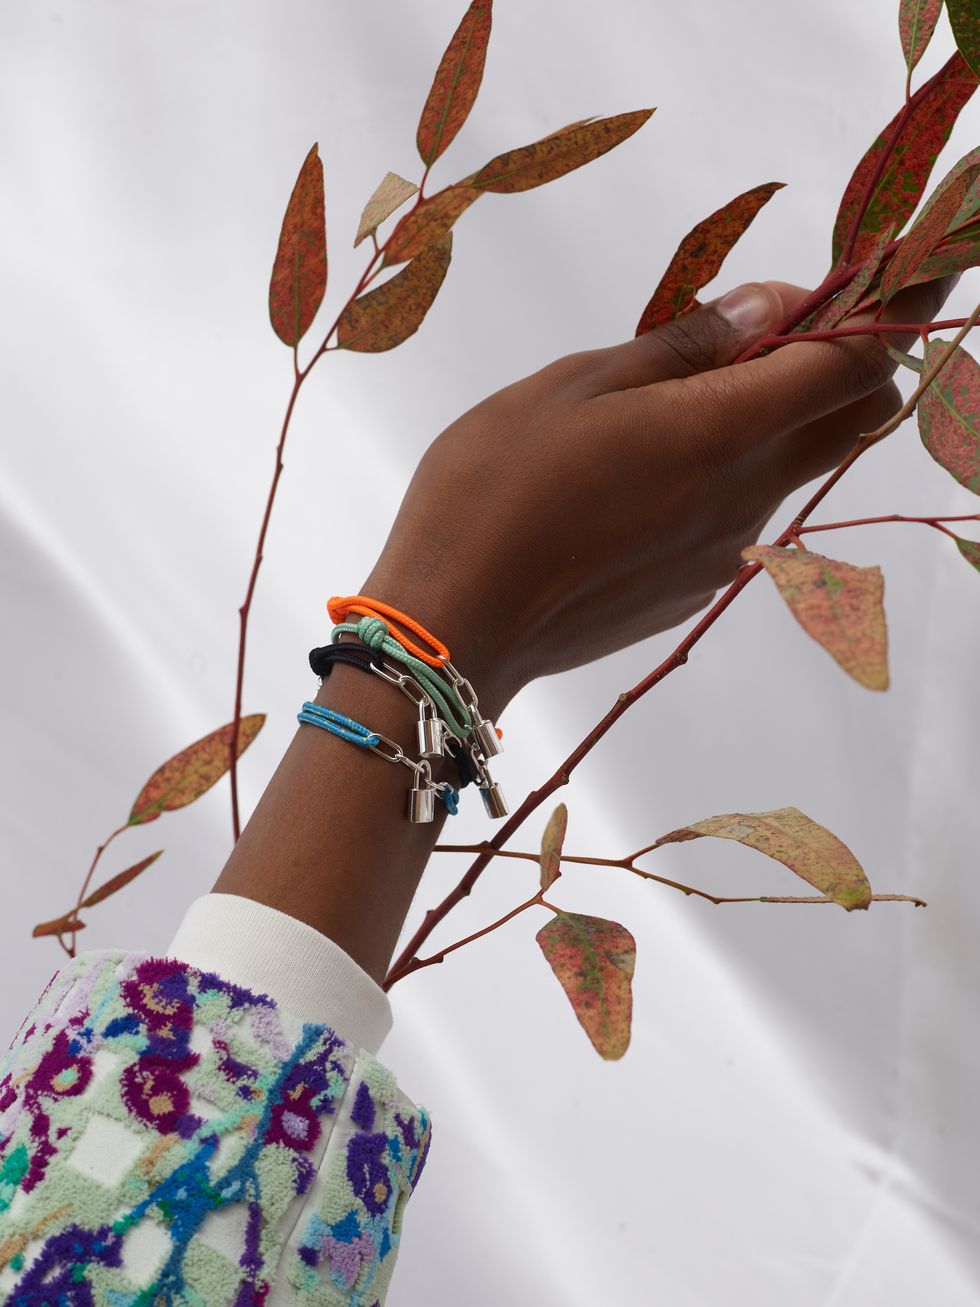 Virgil Abloh’s Louis Vuitton Bracelets Will Provide Funds for Children in Need – W.T. Mag